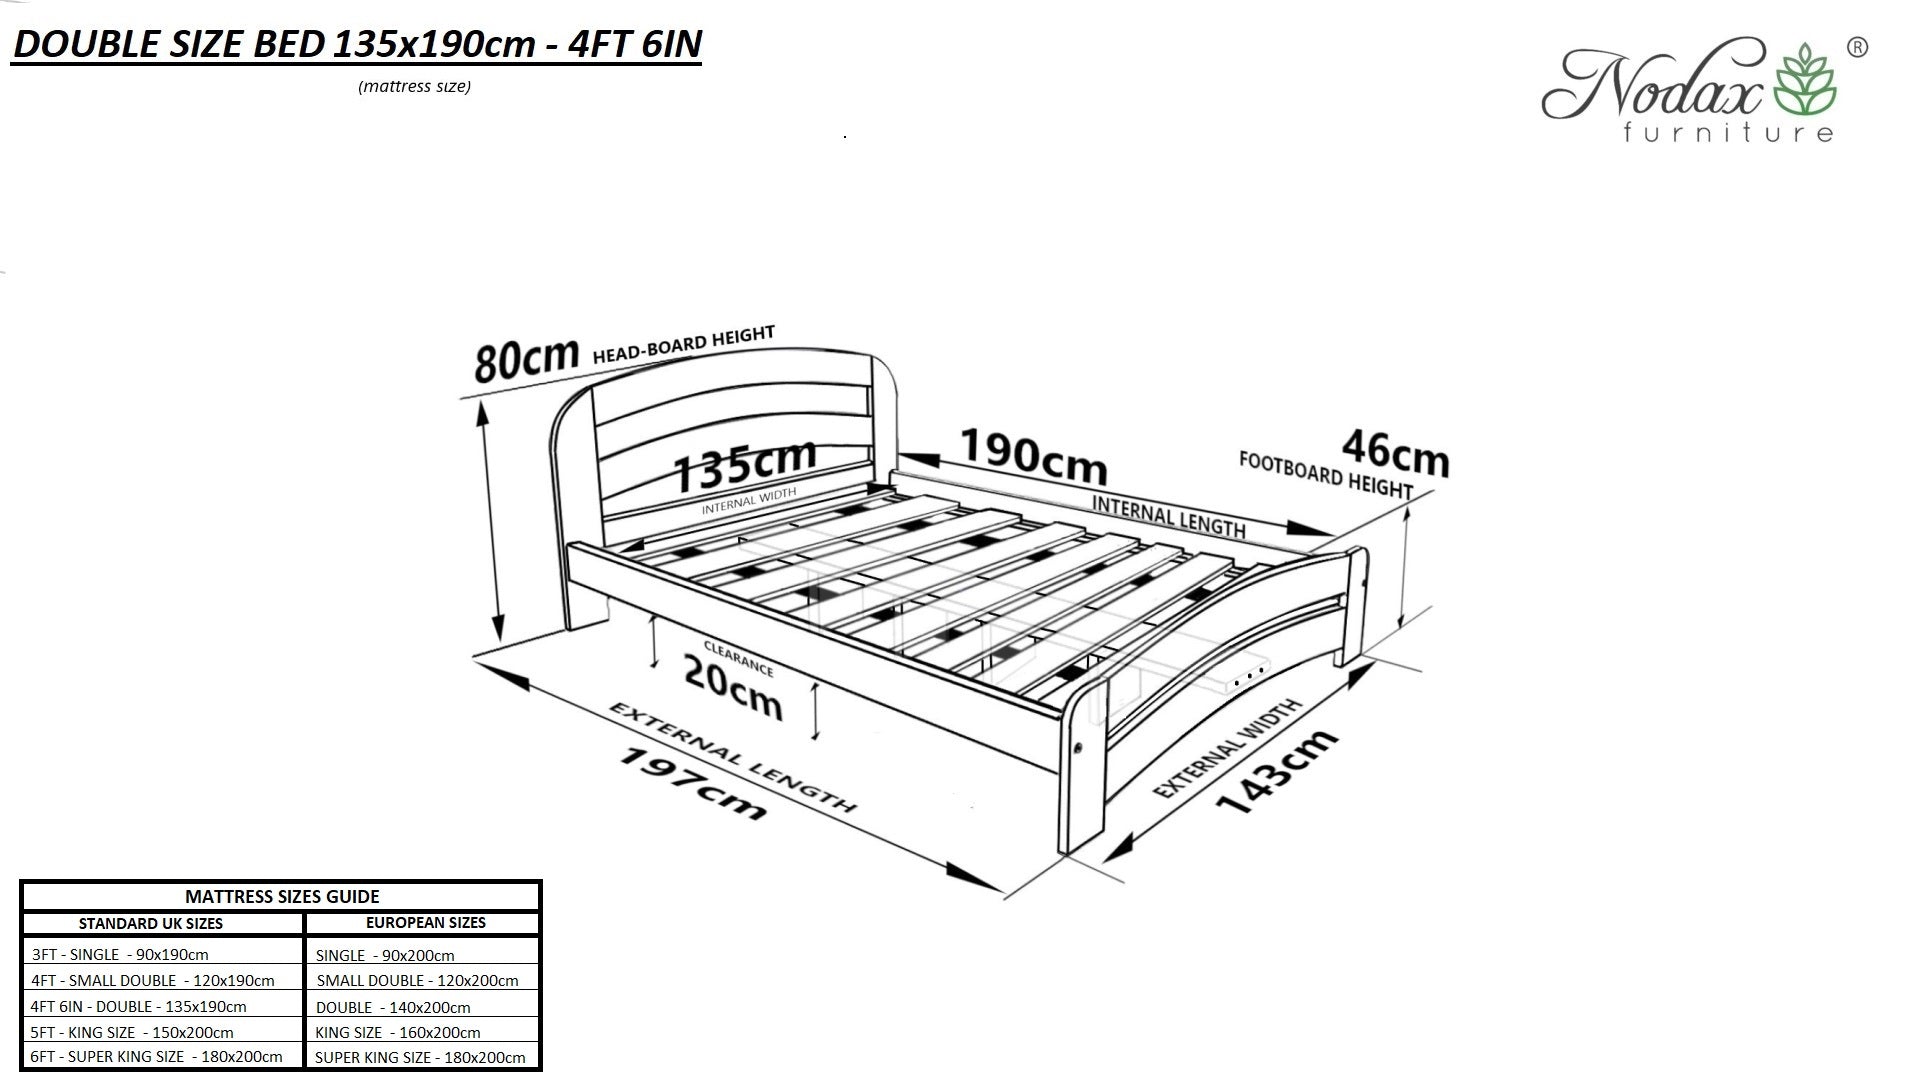 Wooden-bed-frame-dimensions-4ft6in